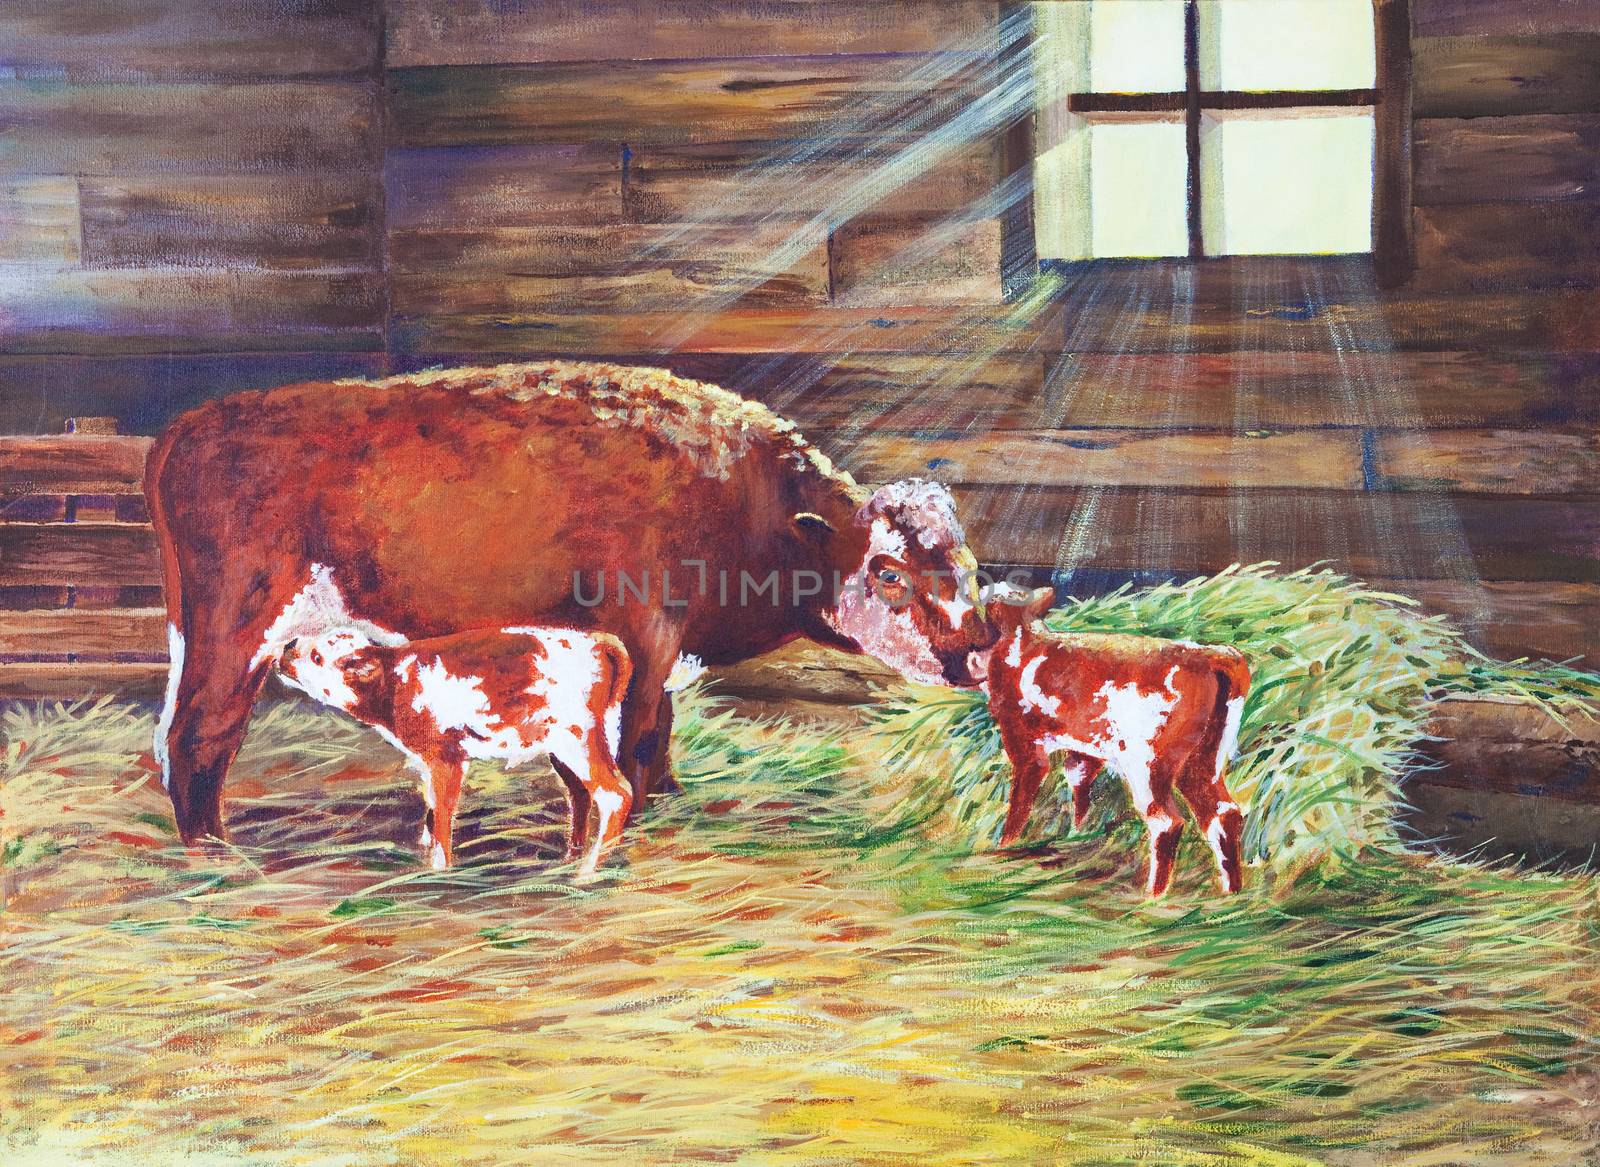 Light radiates through a barn window on a cow and her newborn twin calves.  An original oil painting on canvas.